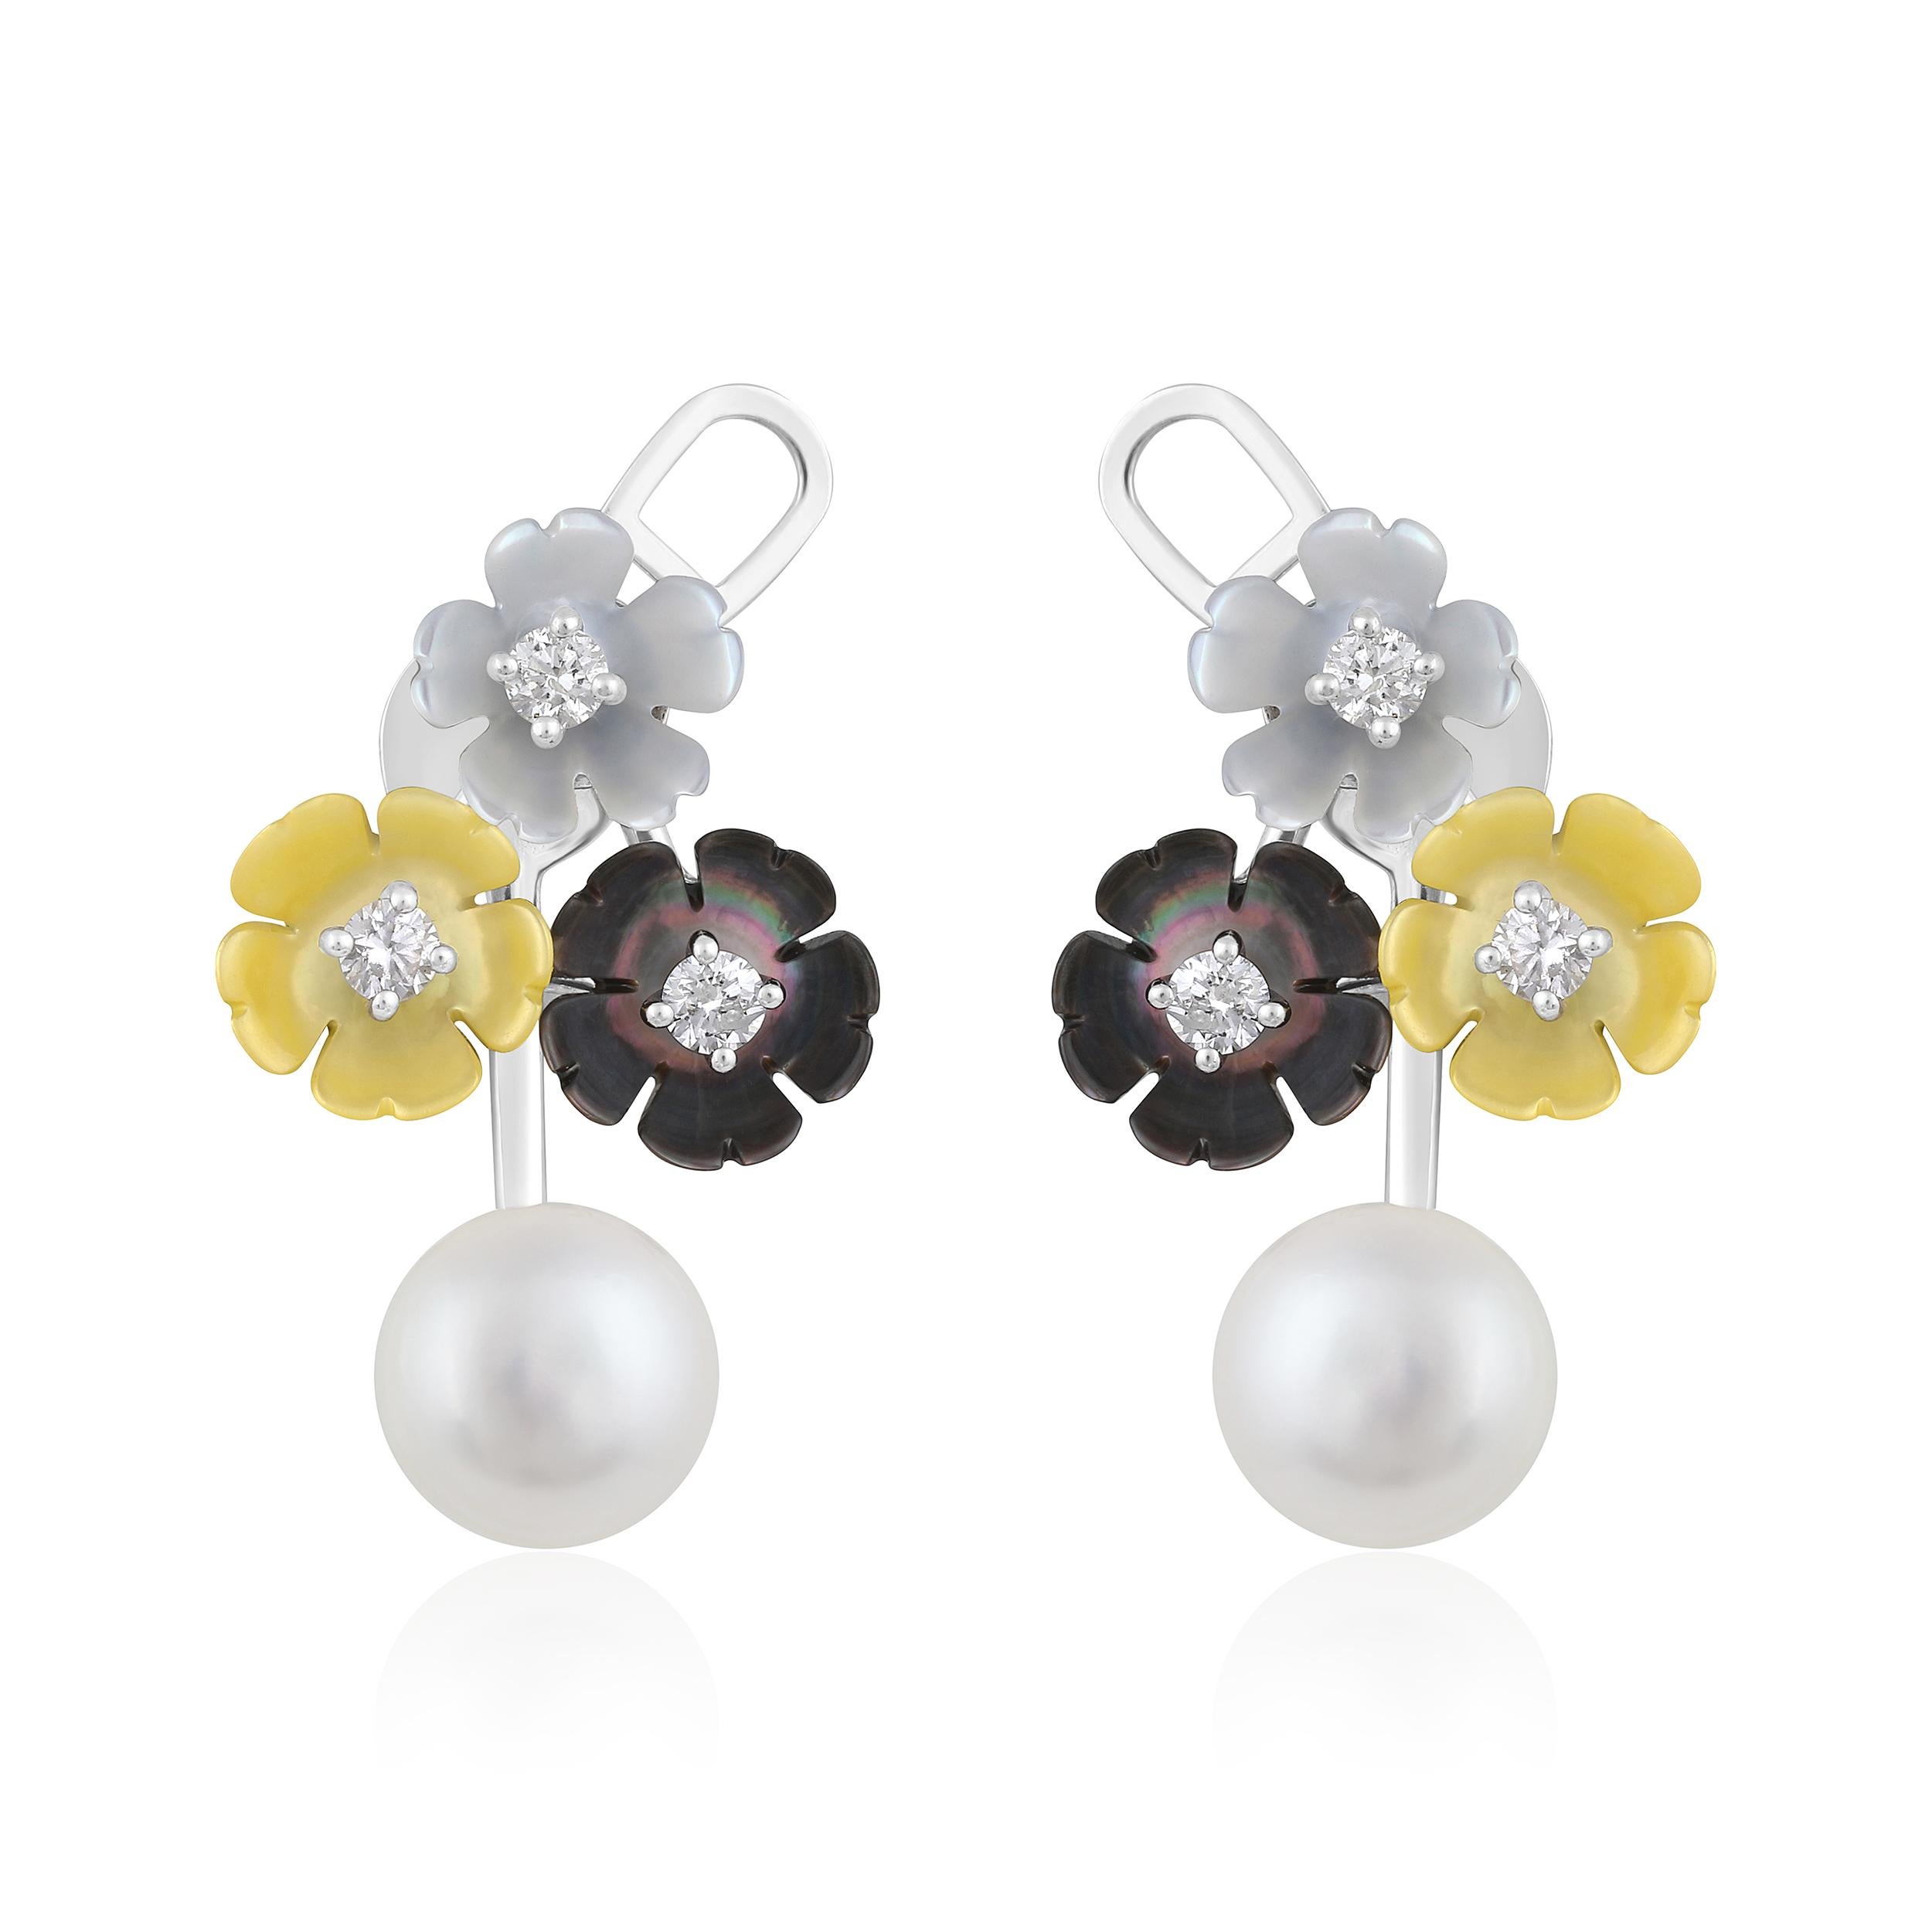 Contemporary Certified 14k Gold 10 Carat Natural Diamond w/ Cultured Pearls 3 Flower Earrings For Sale